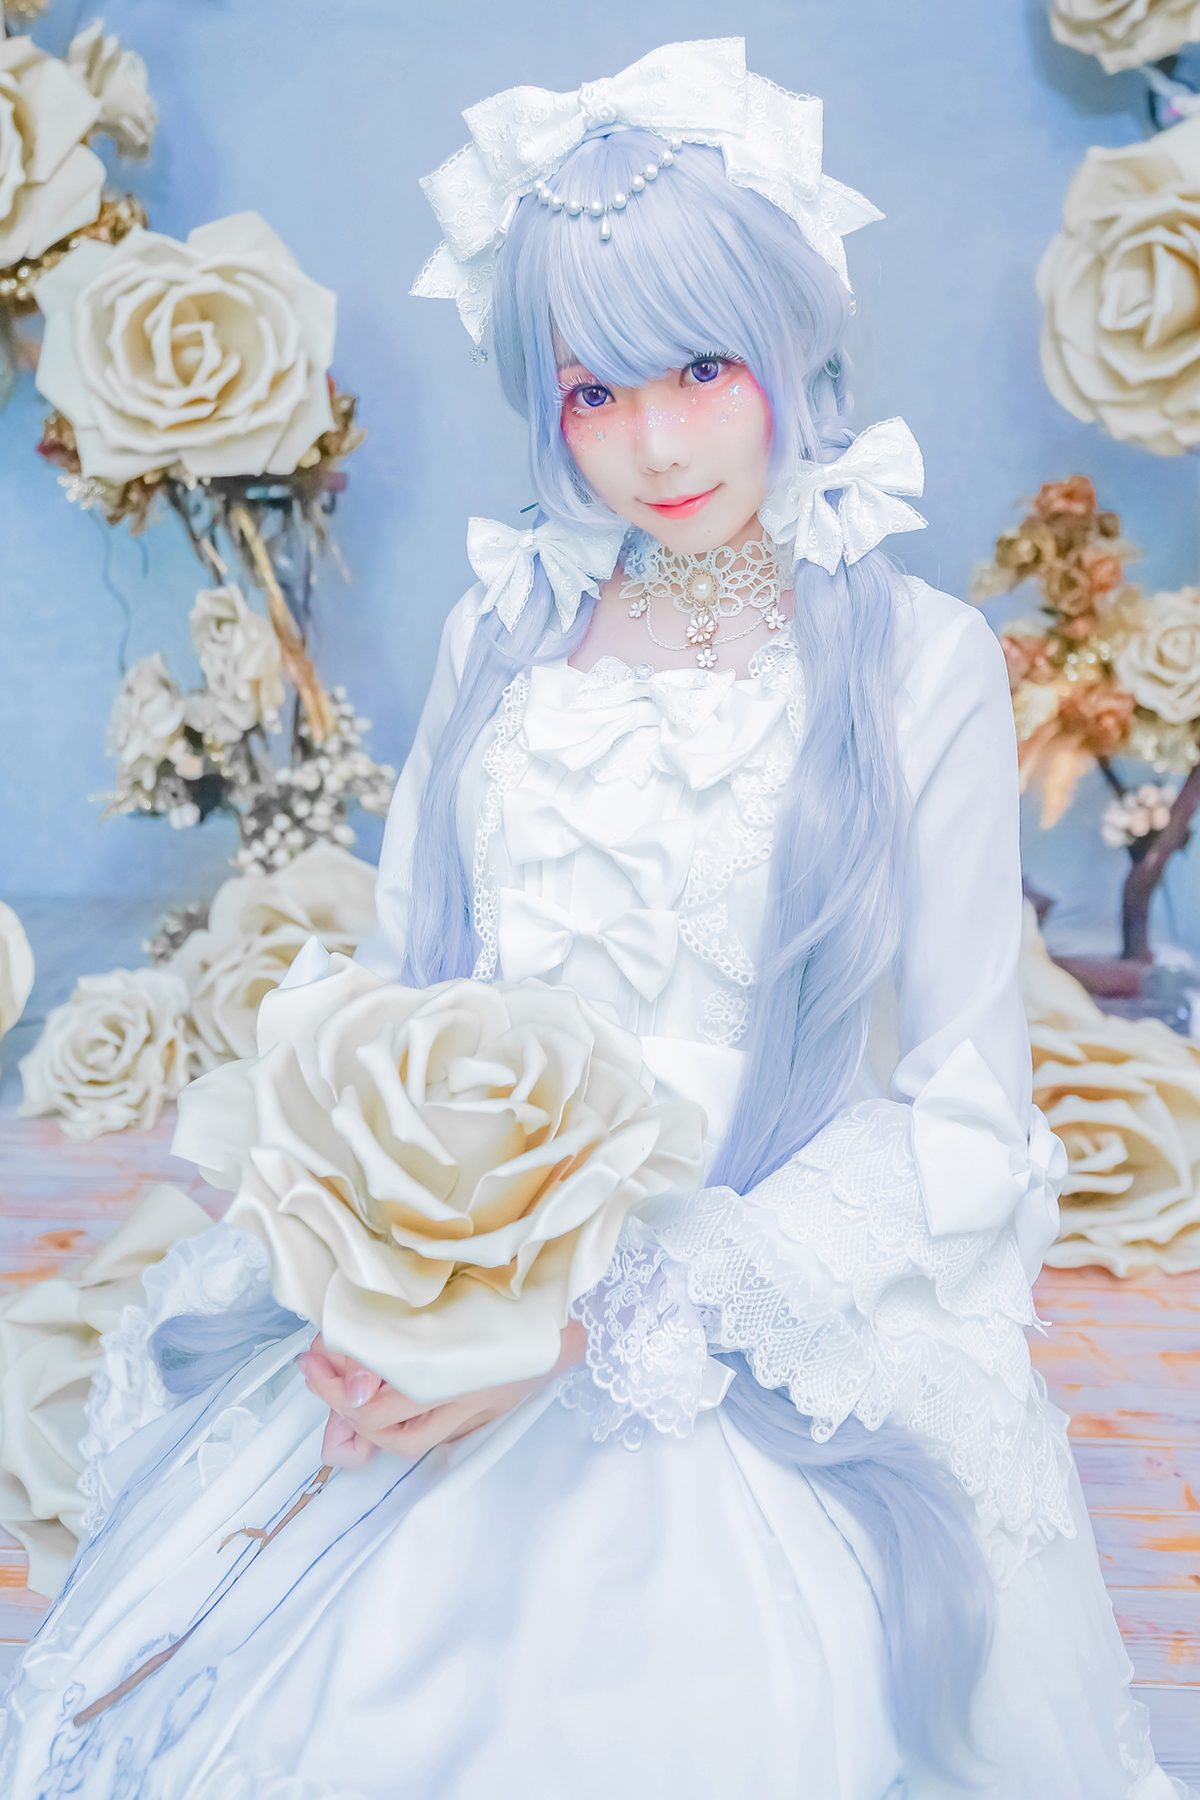 Coser@Ely_eee ElyEE子 TUESDAY TWINTAIL A 0037 7860968908.jpg